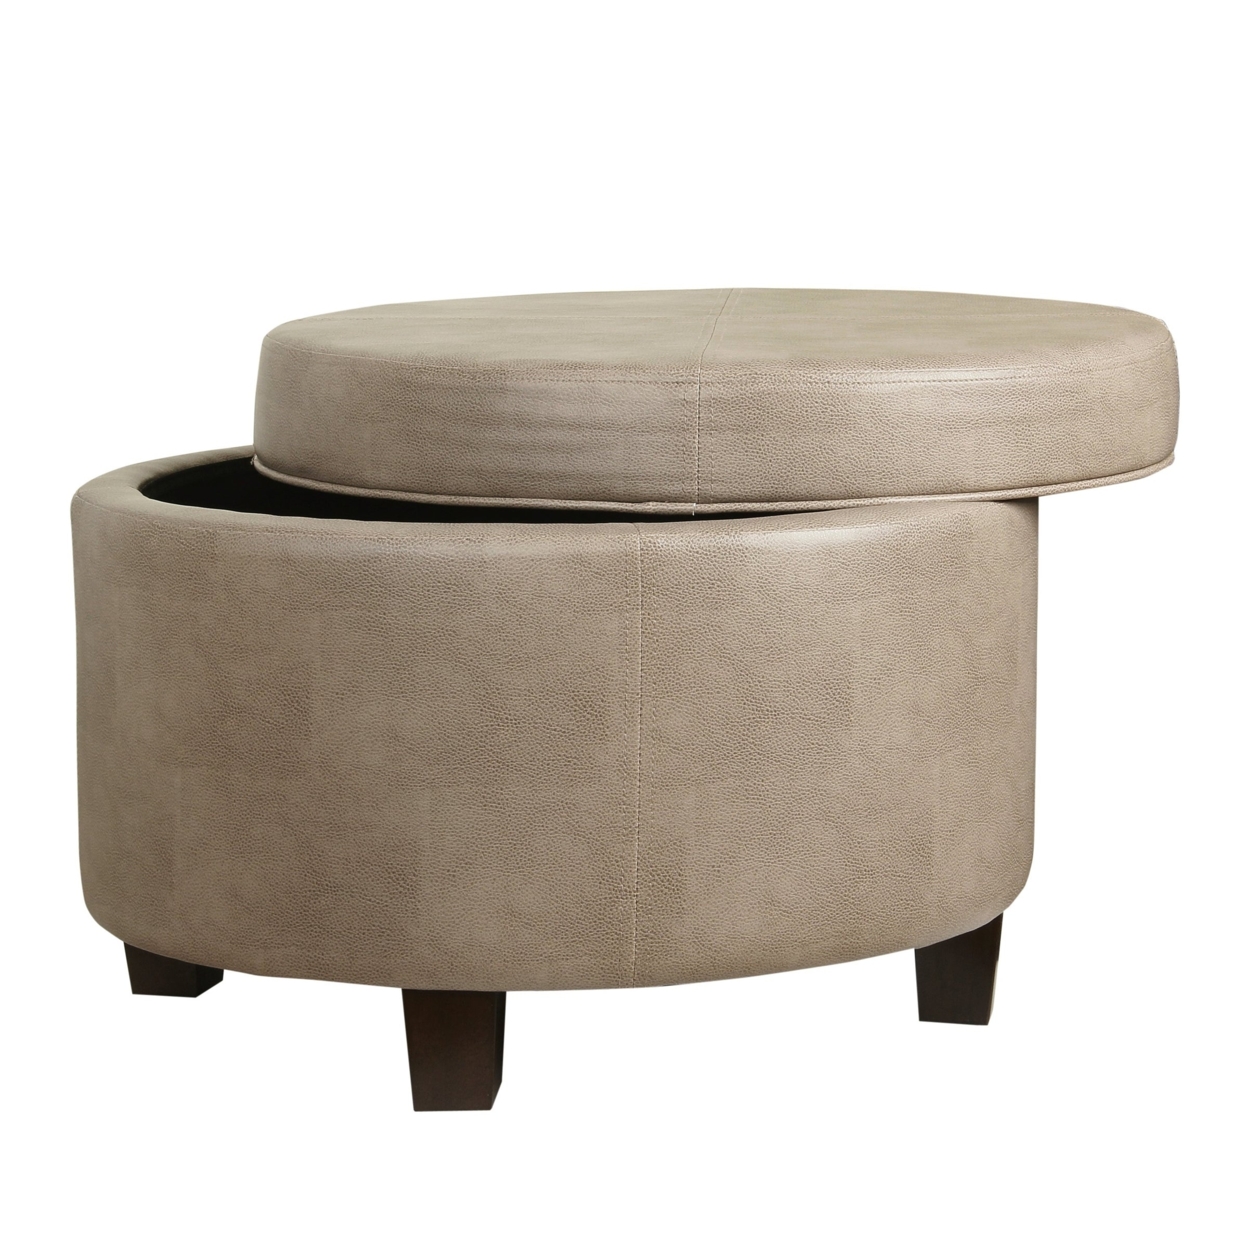 Faux Leather Upholstered Wooden Ottoman With Lift Off Lid Storage, Brown- Saltoro Sherpi